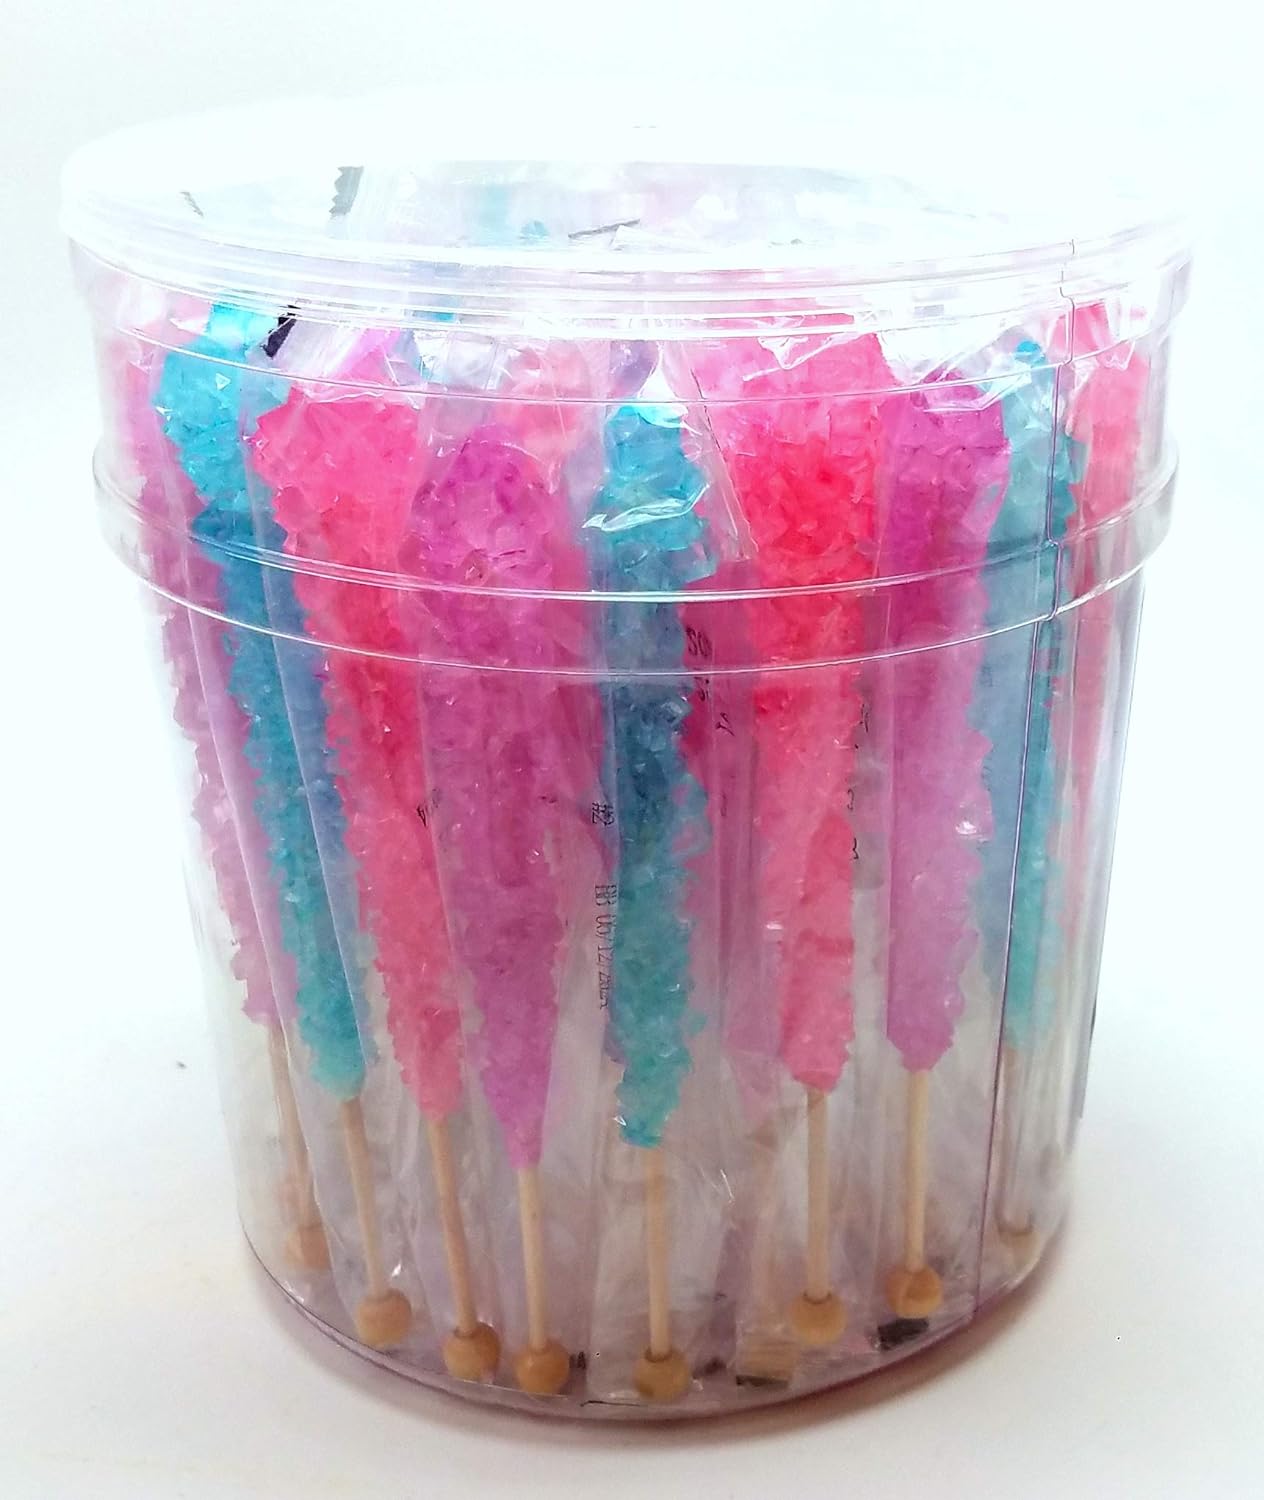  Candy Envy Mermaid Rock Candy Sticks - 36 Individually Wrapped Rock Candy on a Stick - Includes How to Build a Candy Buffet Table Guide